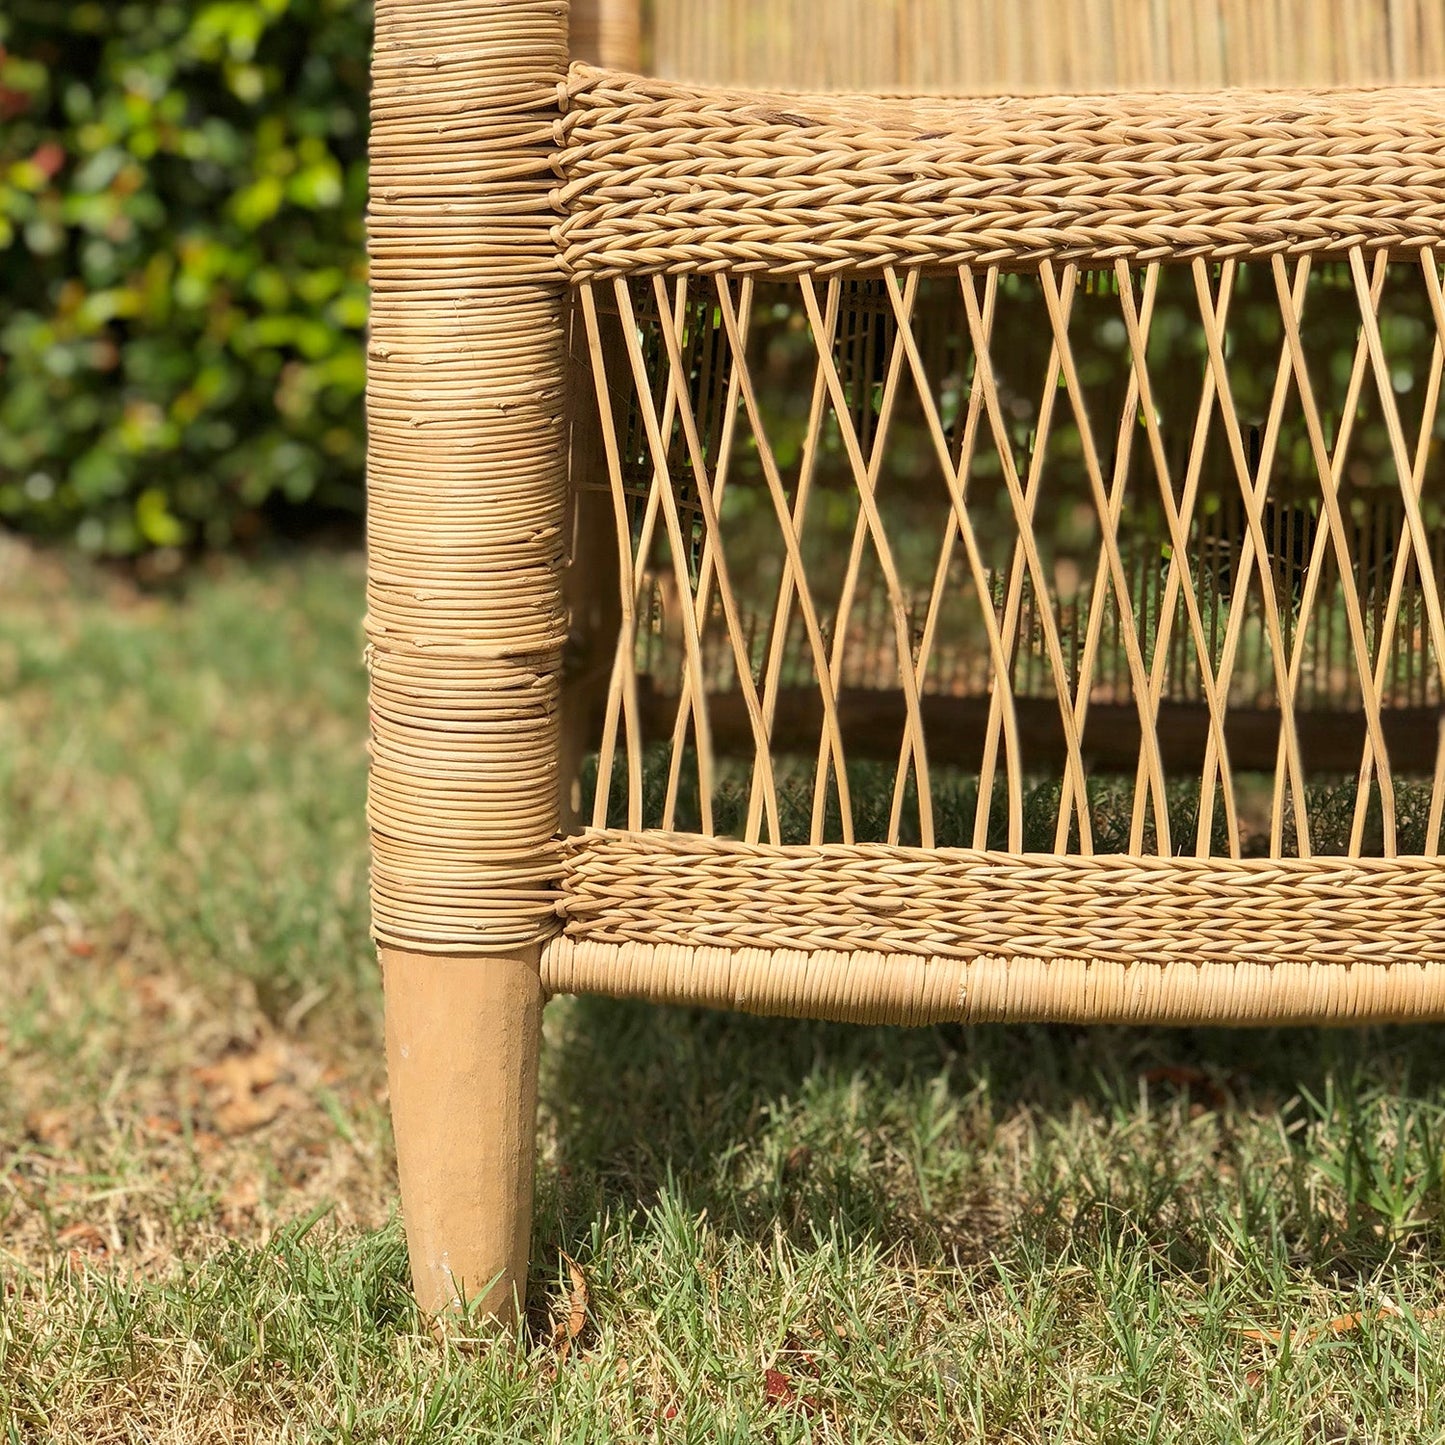 Two Double set combo Traditional Malawi Cane Chair Furniture Chairs Rattan Weaved Wicker